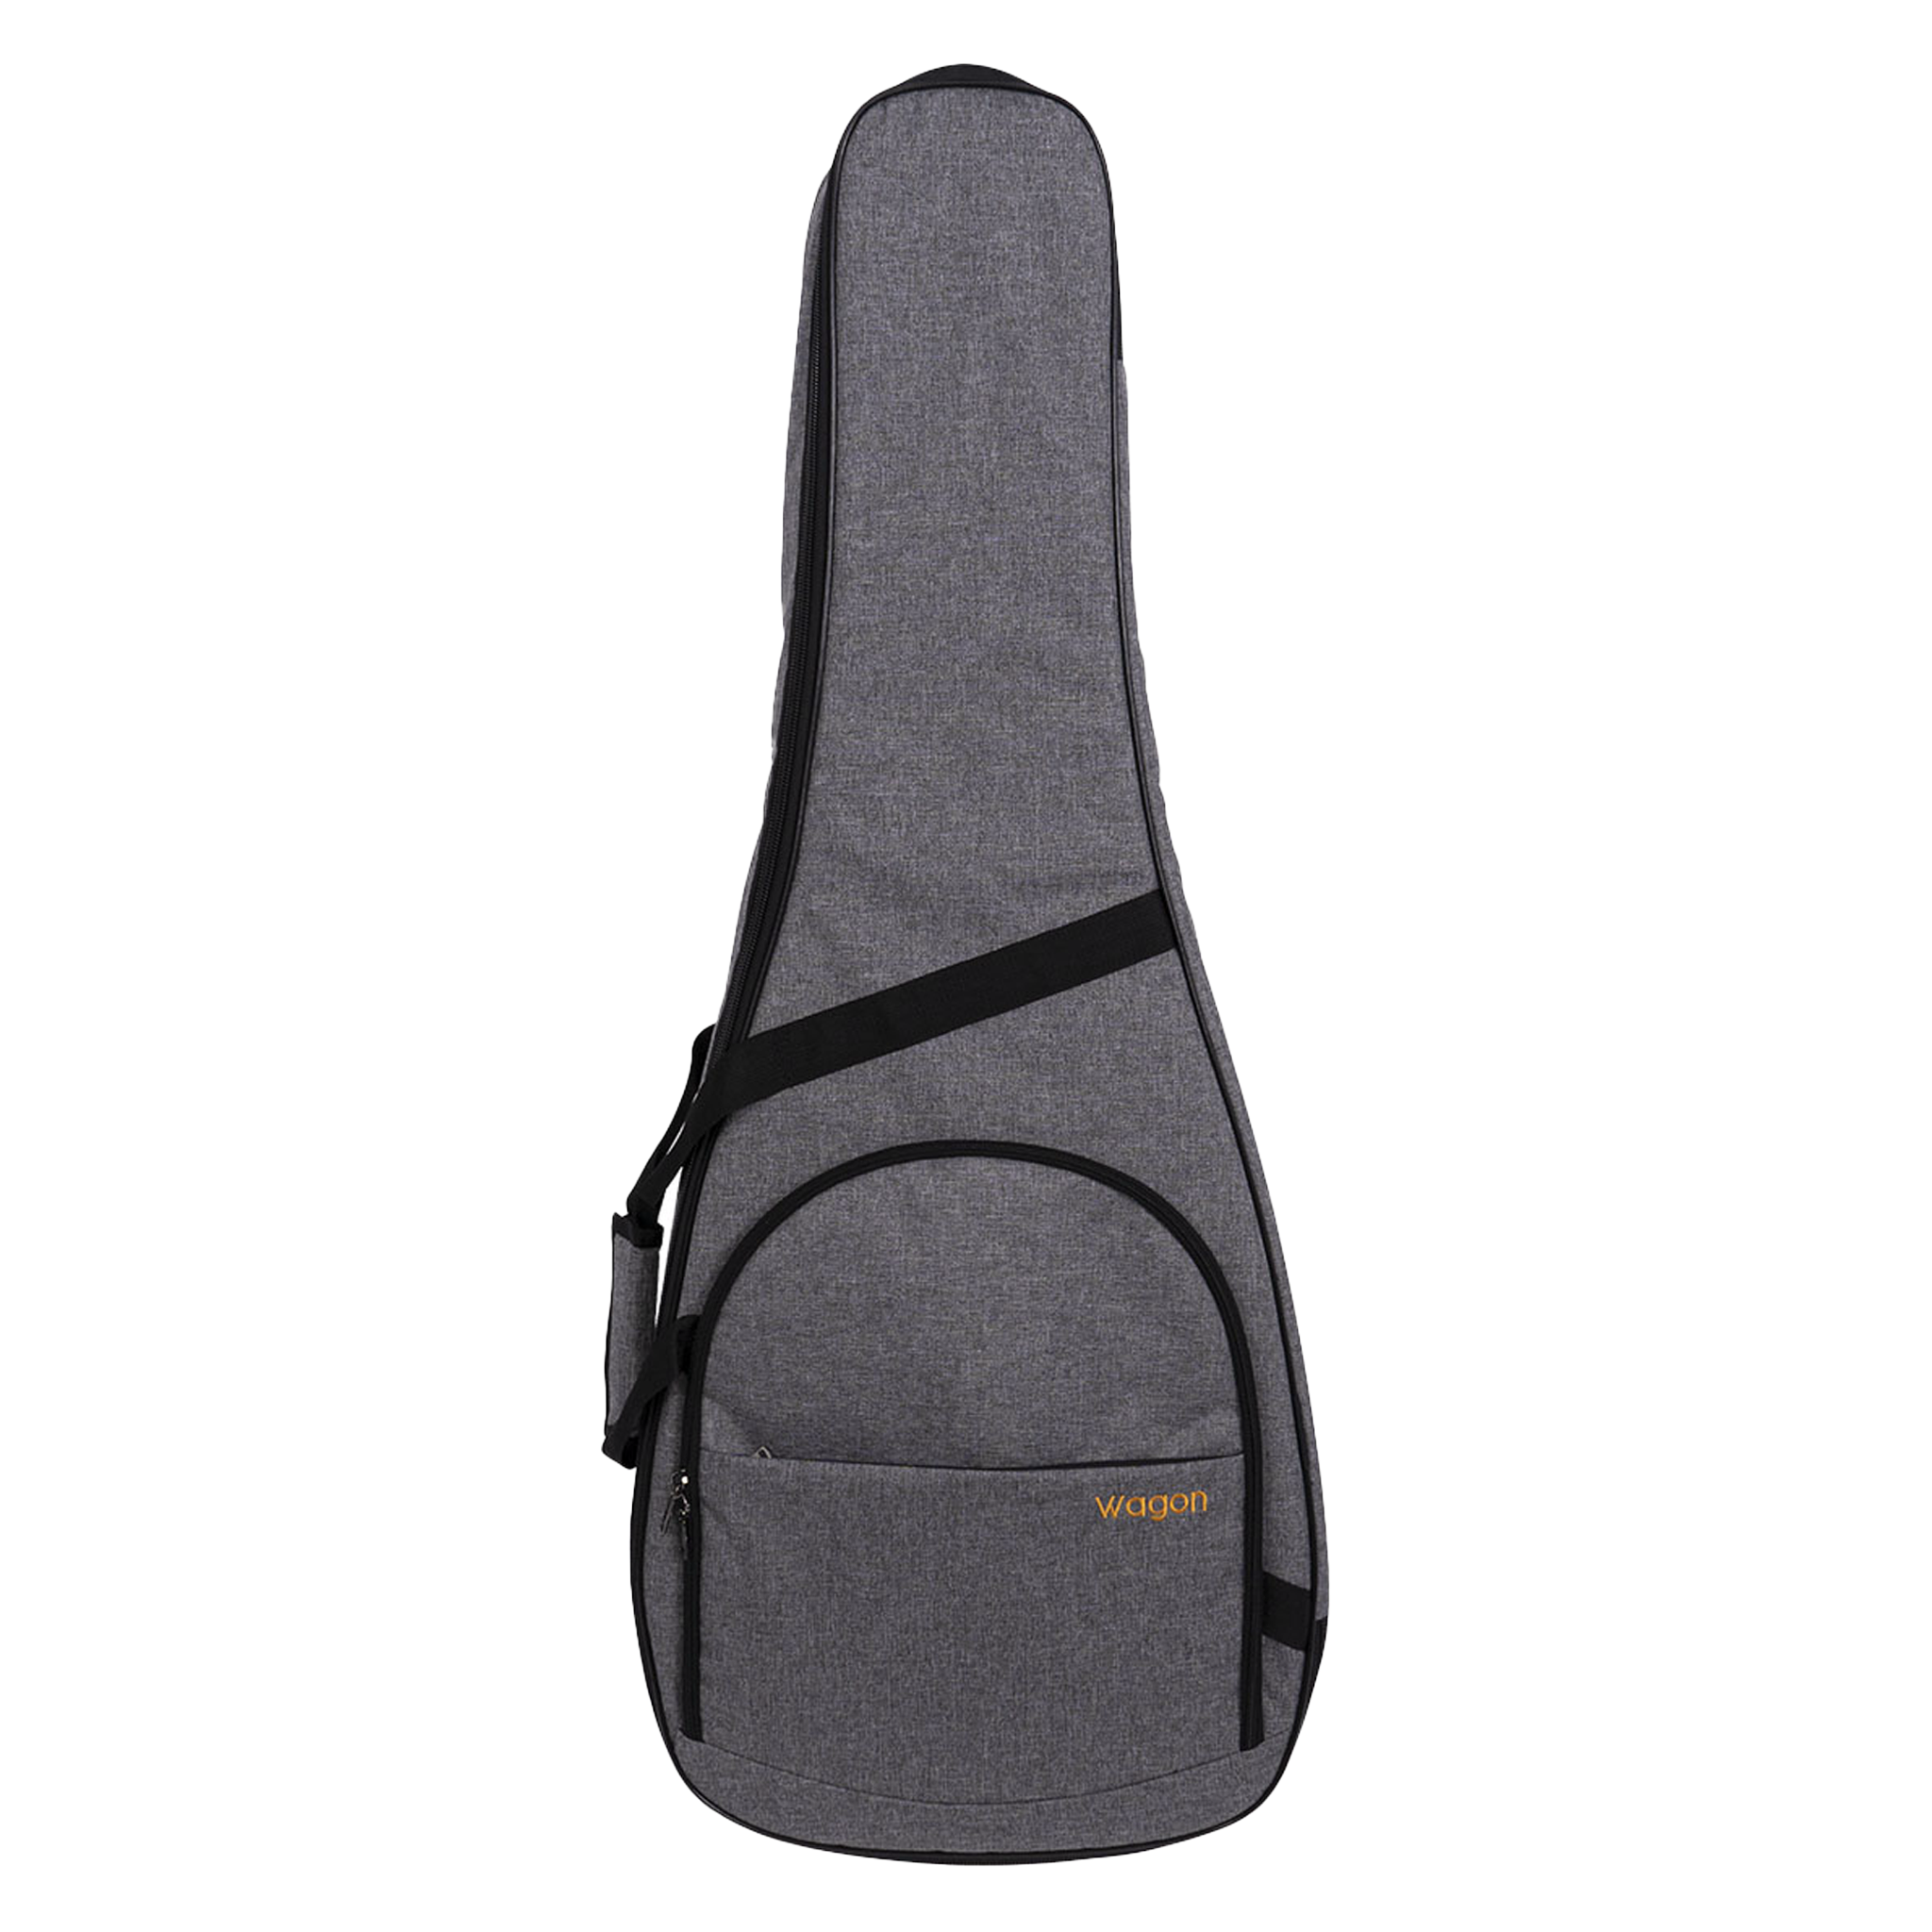 Olive India OL-10 Best Heavy Padded Acoustic Guitar Bag(Grey) for: All  Brand DREADNOUGHT Body Guitars : Amazon.in: Musical Instruments